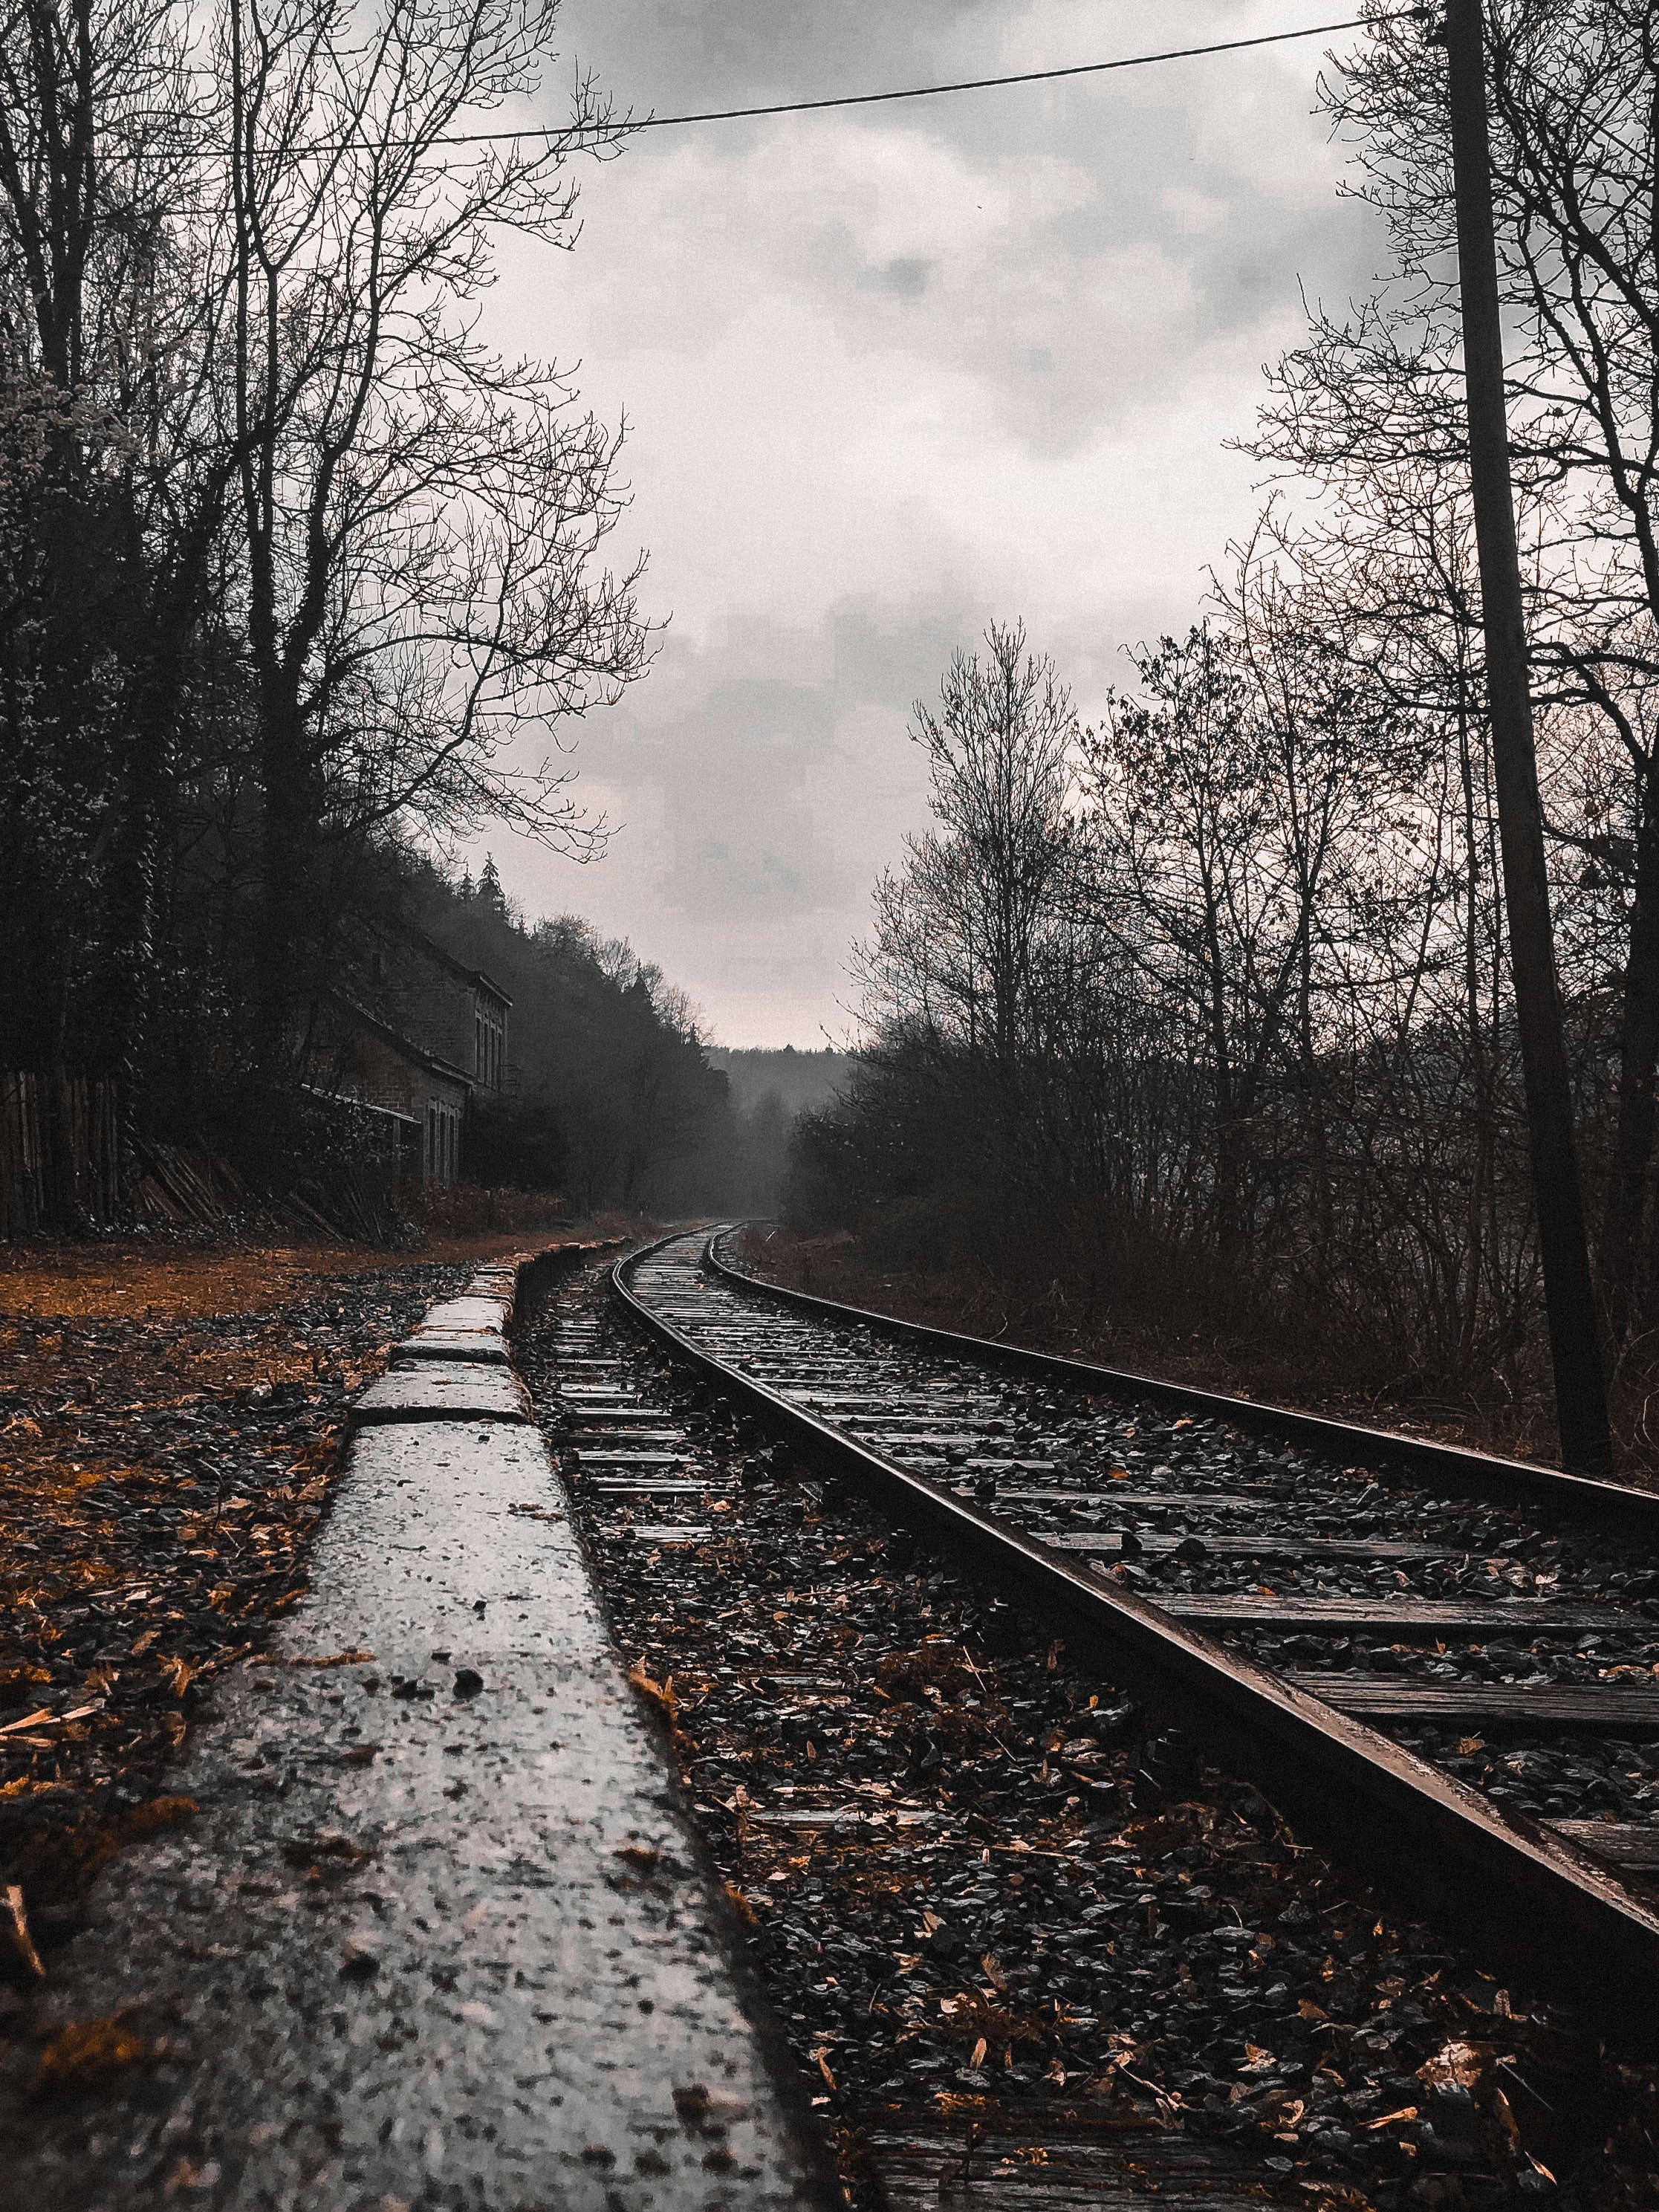 mainly cloudy, rails, forest, nature, railway, overcast Phone Background